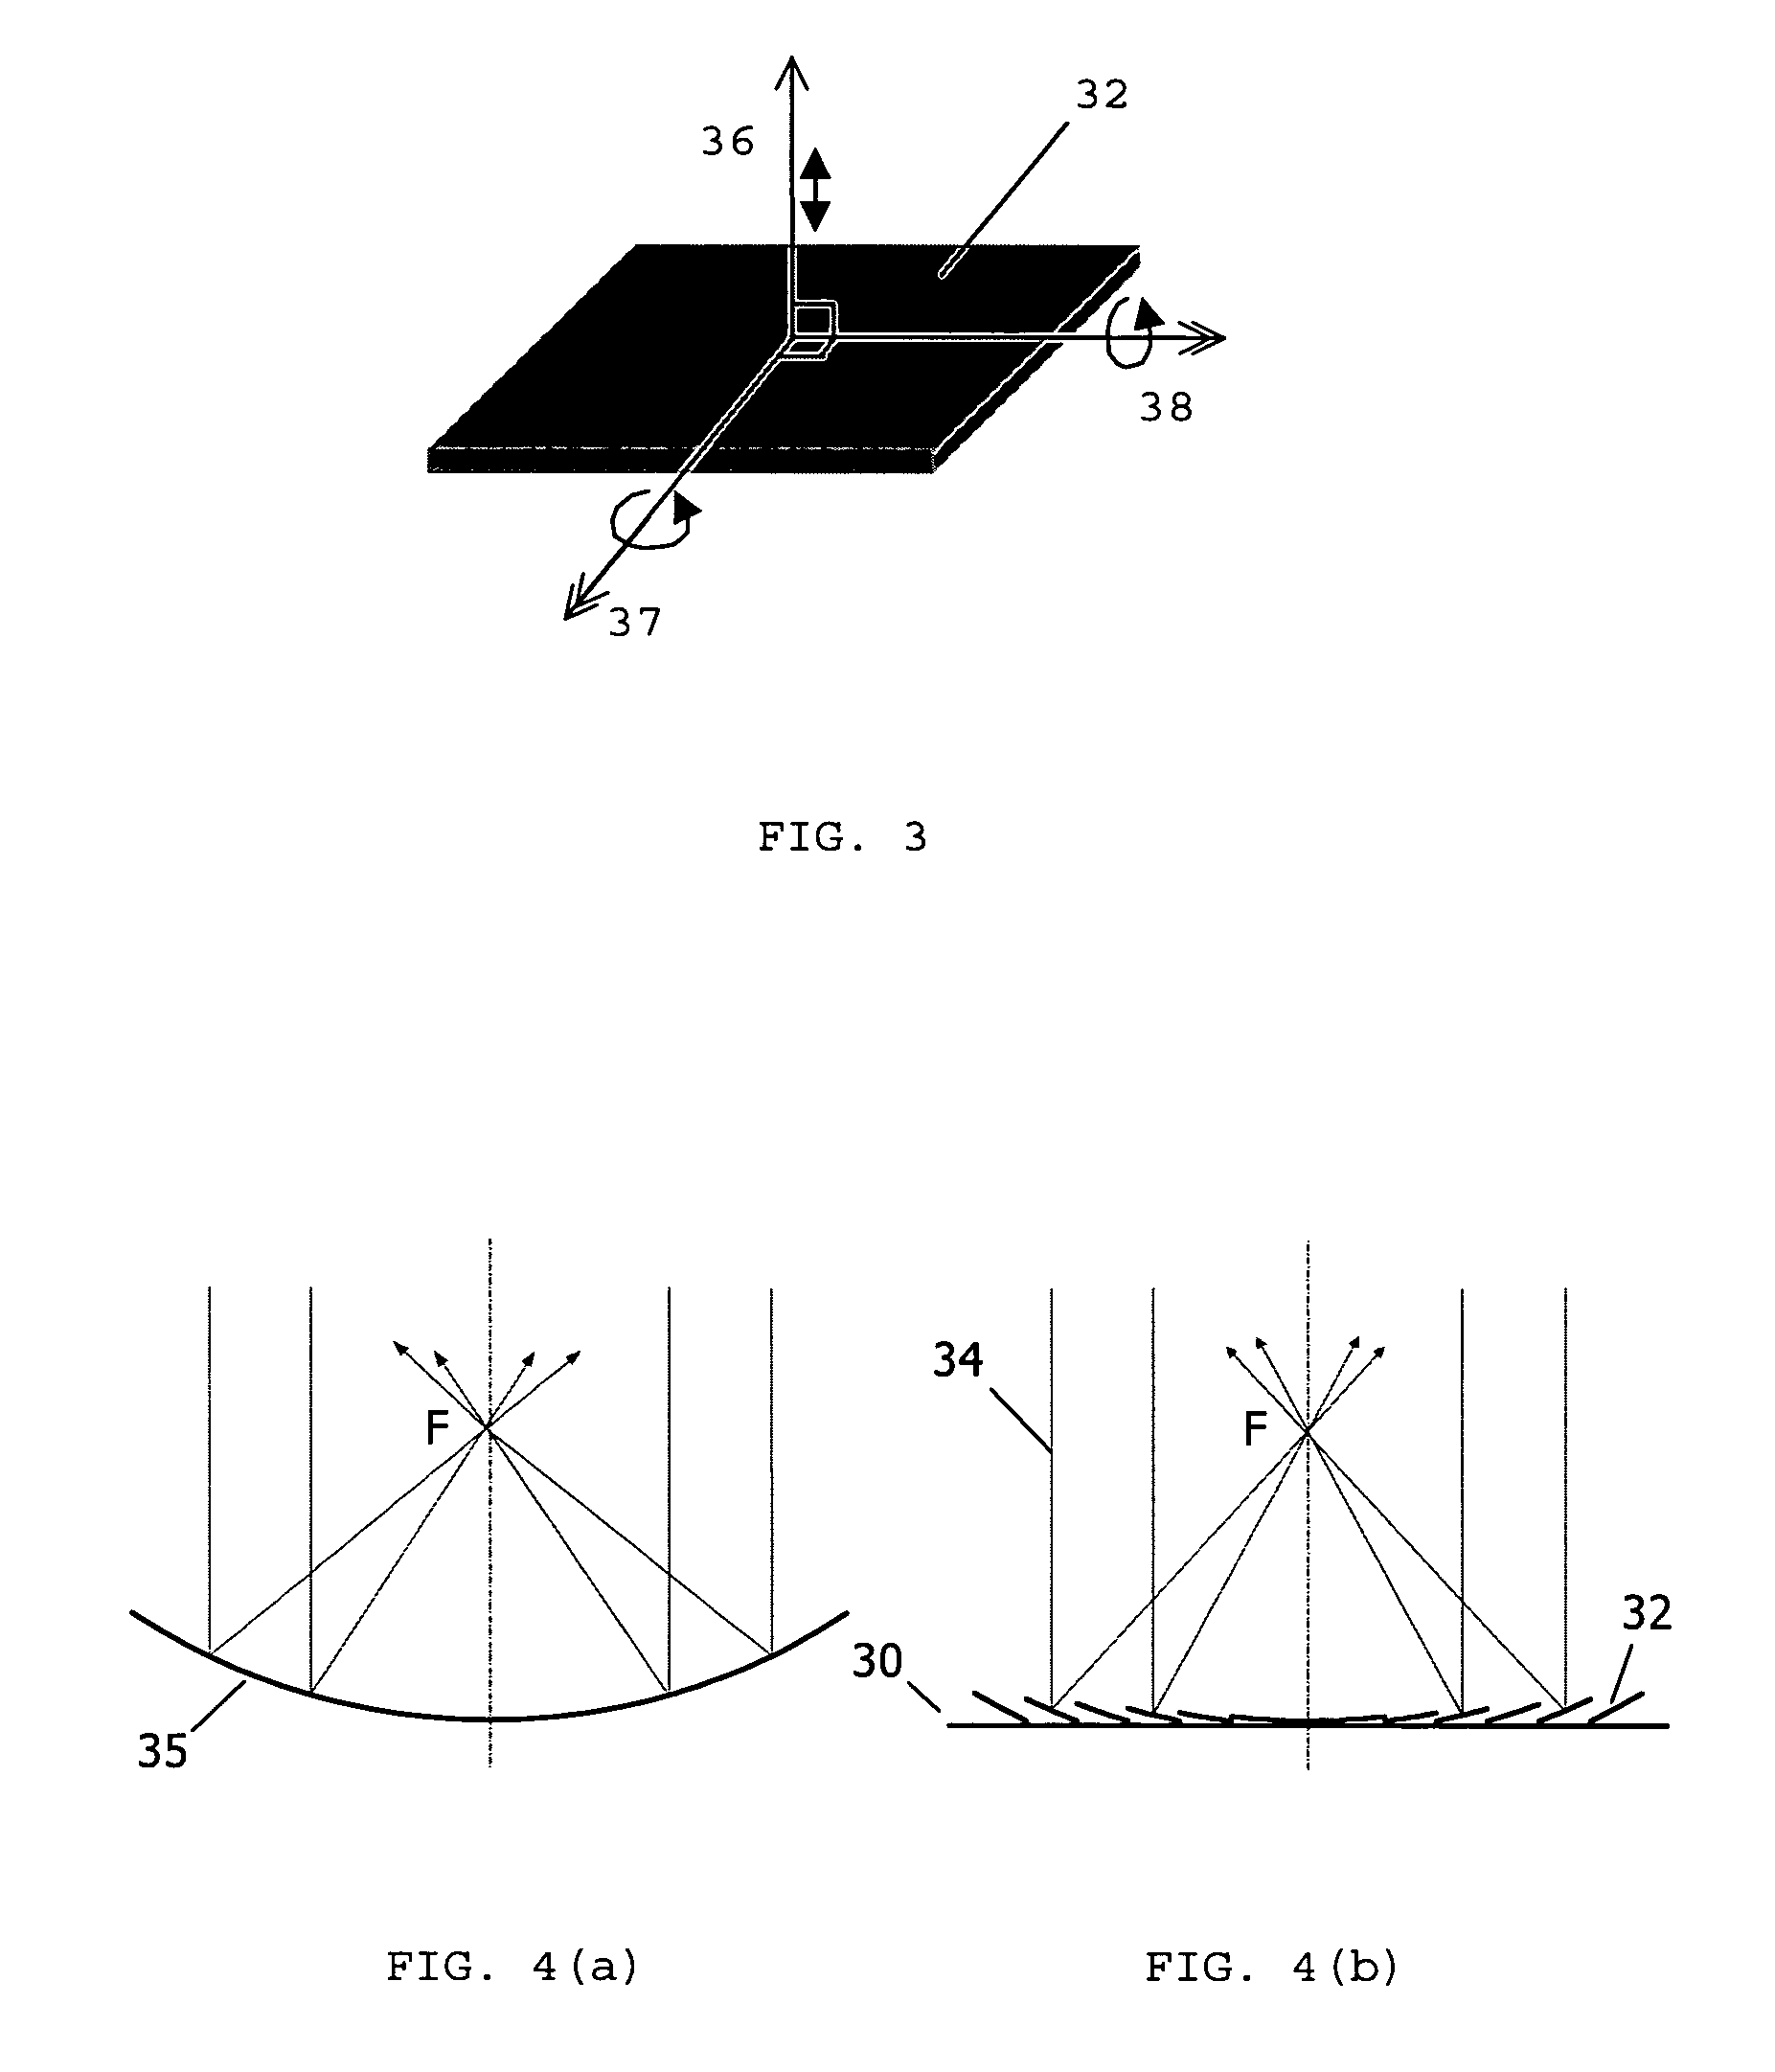 Optical pick-up device using micromirror array lens